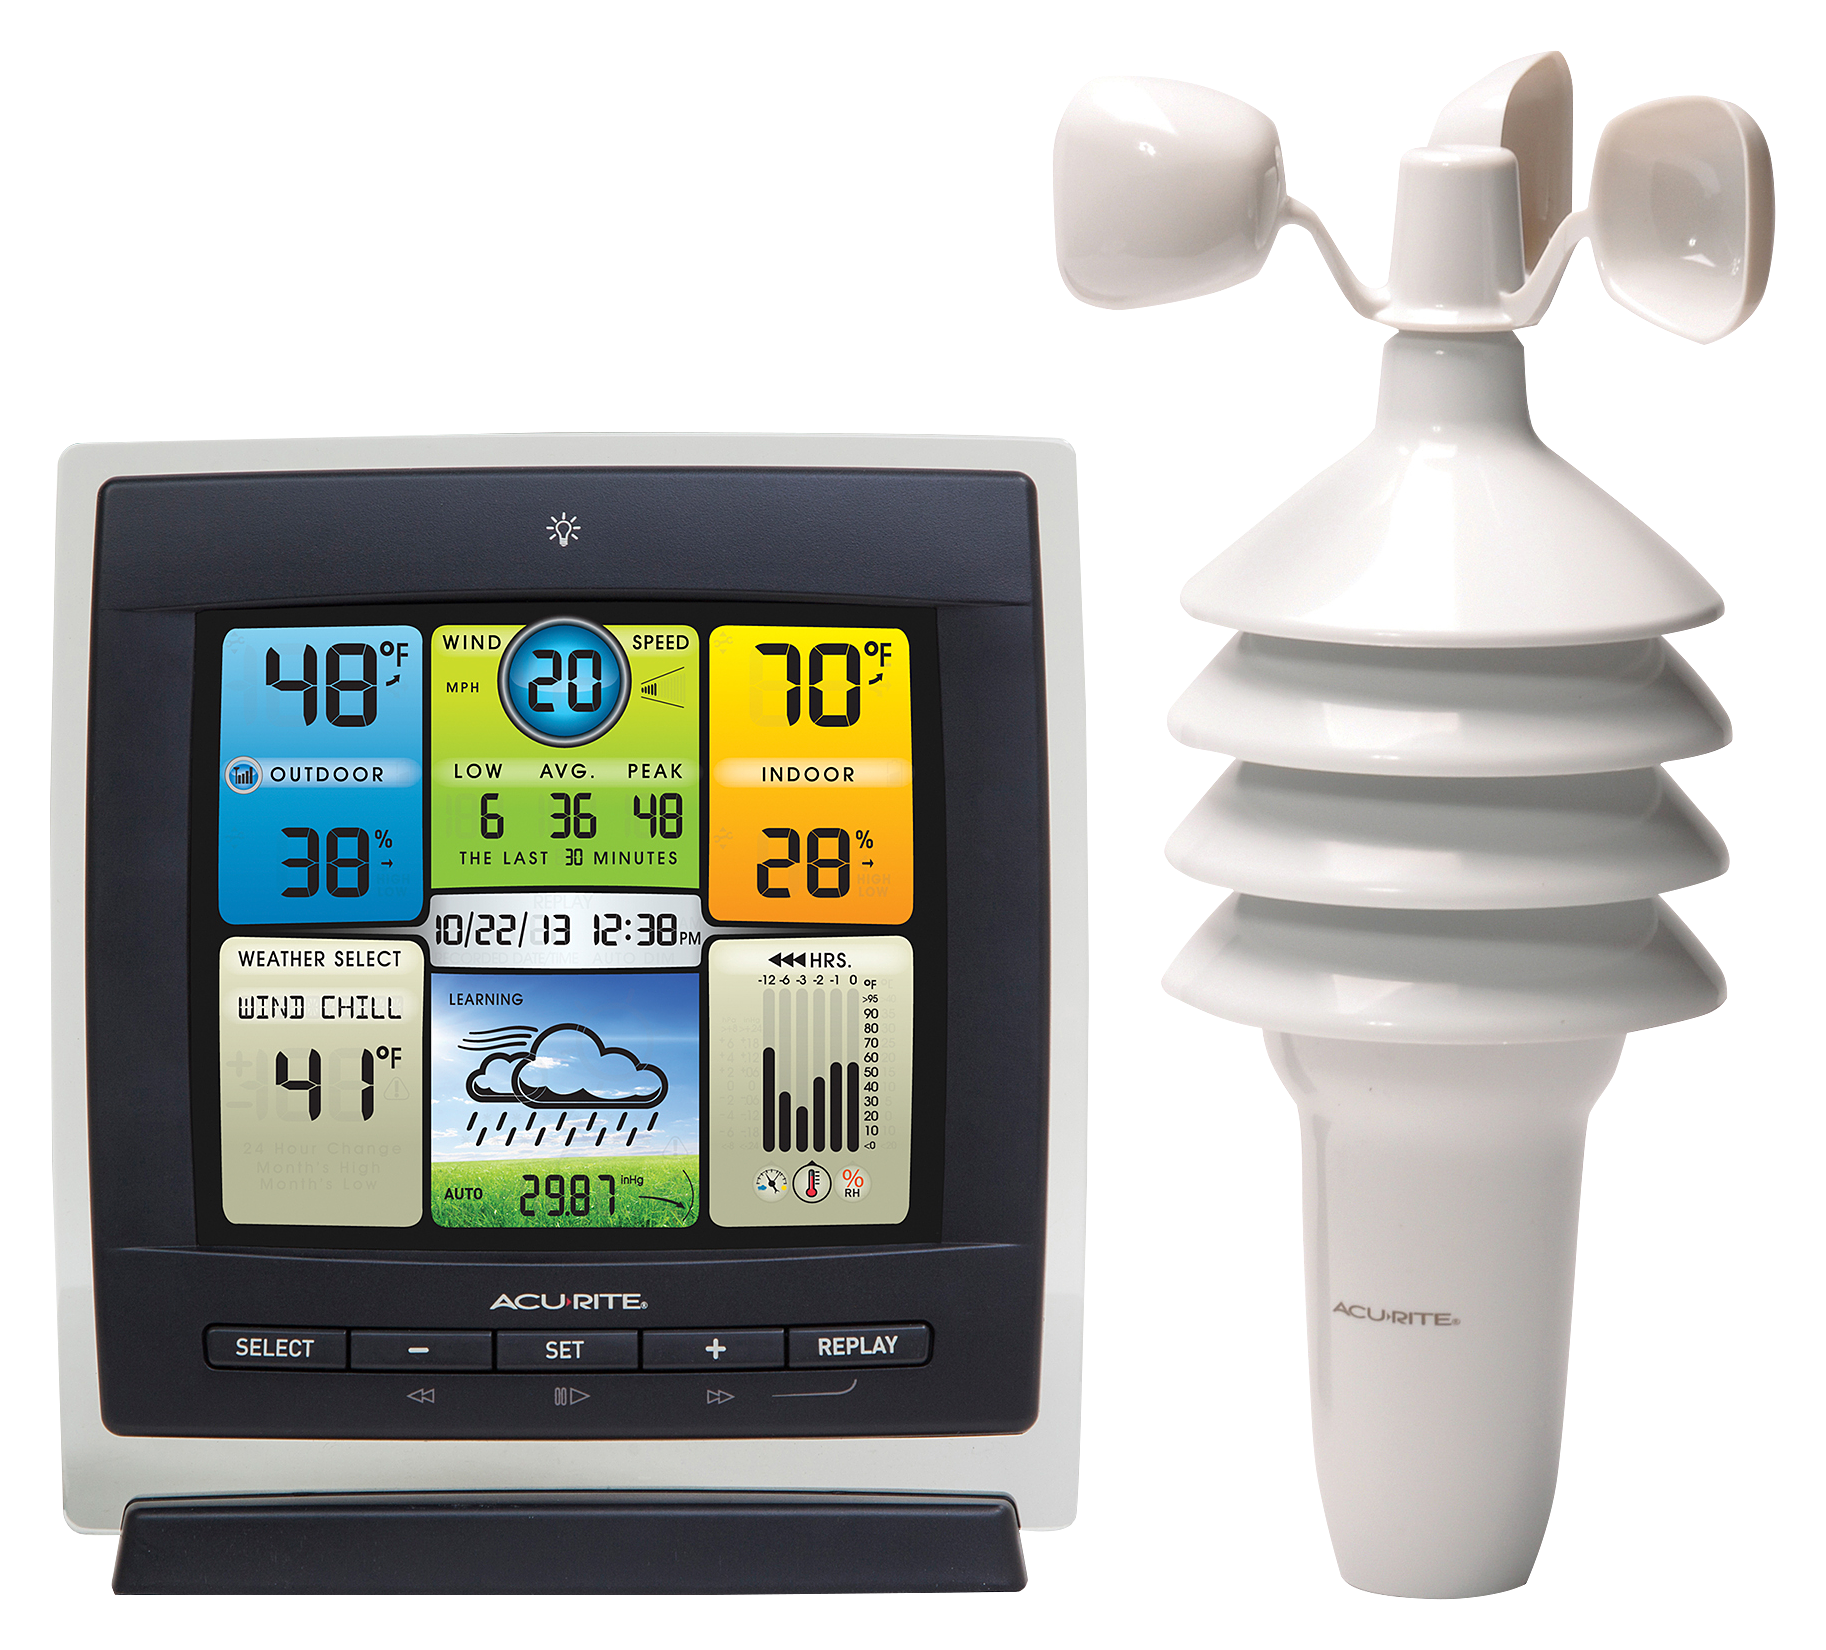 AcuRite Notos 3-in-1 Weather Station with Wind Speed, Temperature, and Humidity